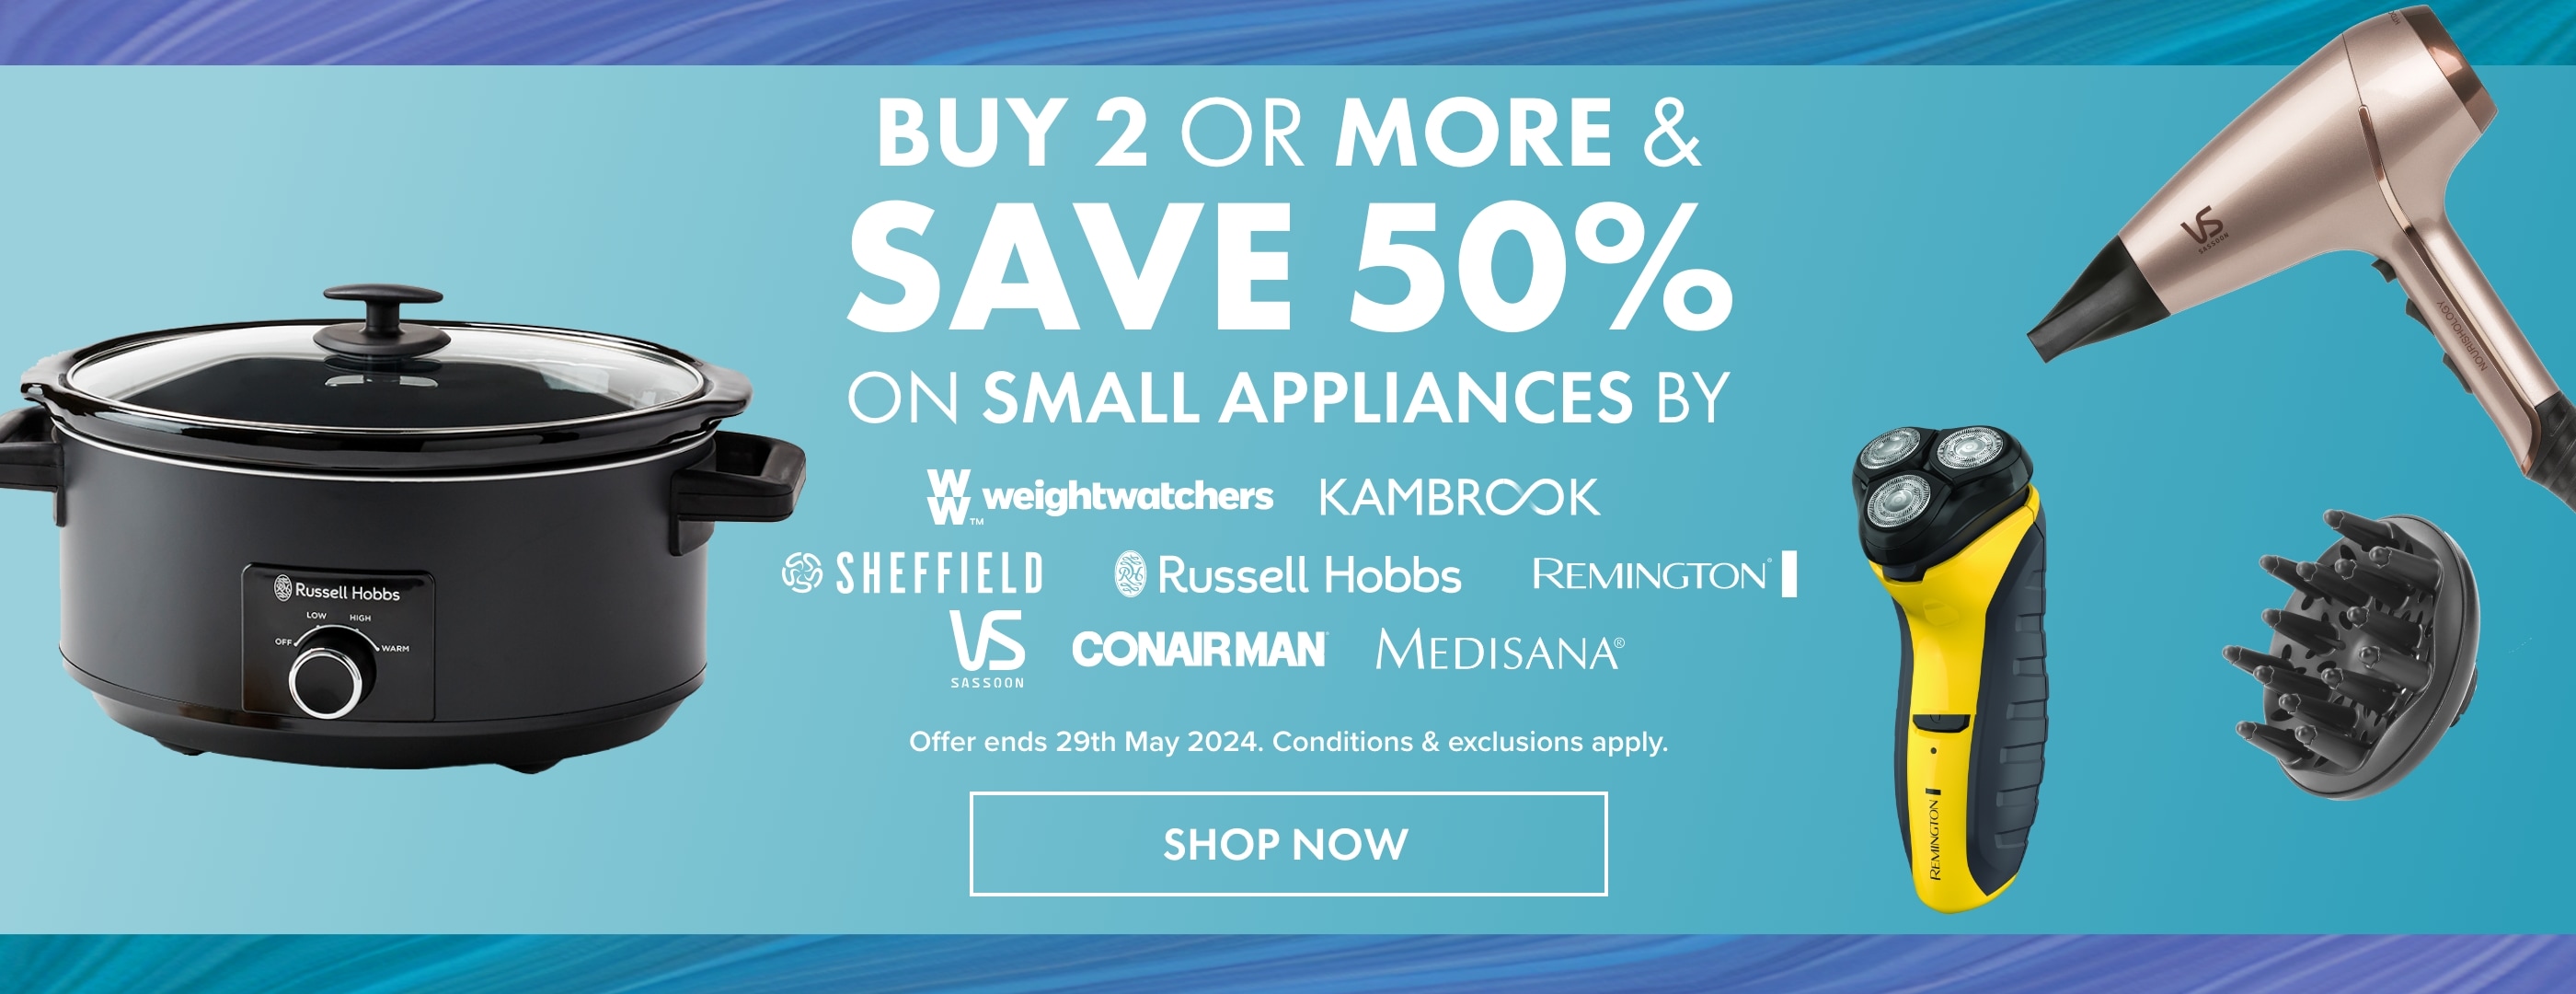 Buy 2 & Save 50% on Small Appliances by Russell Hobbs, Kambrook, Sheffield, Remington, VS Sassoon, Conair Man & Weight Watches